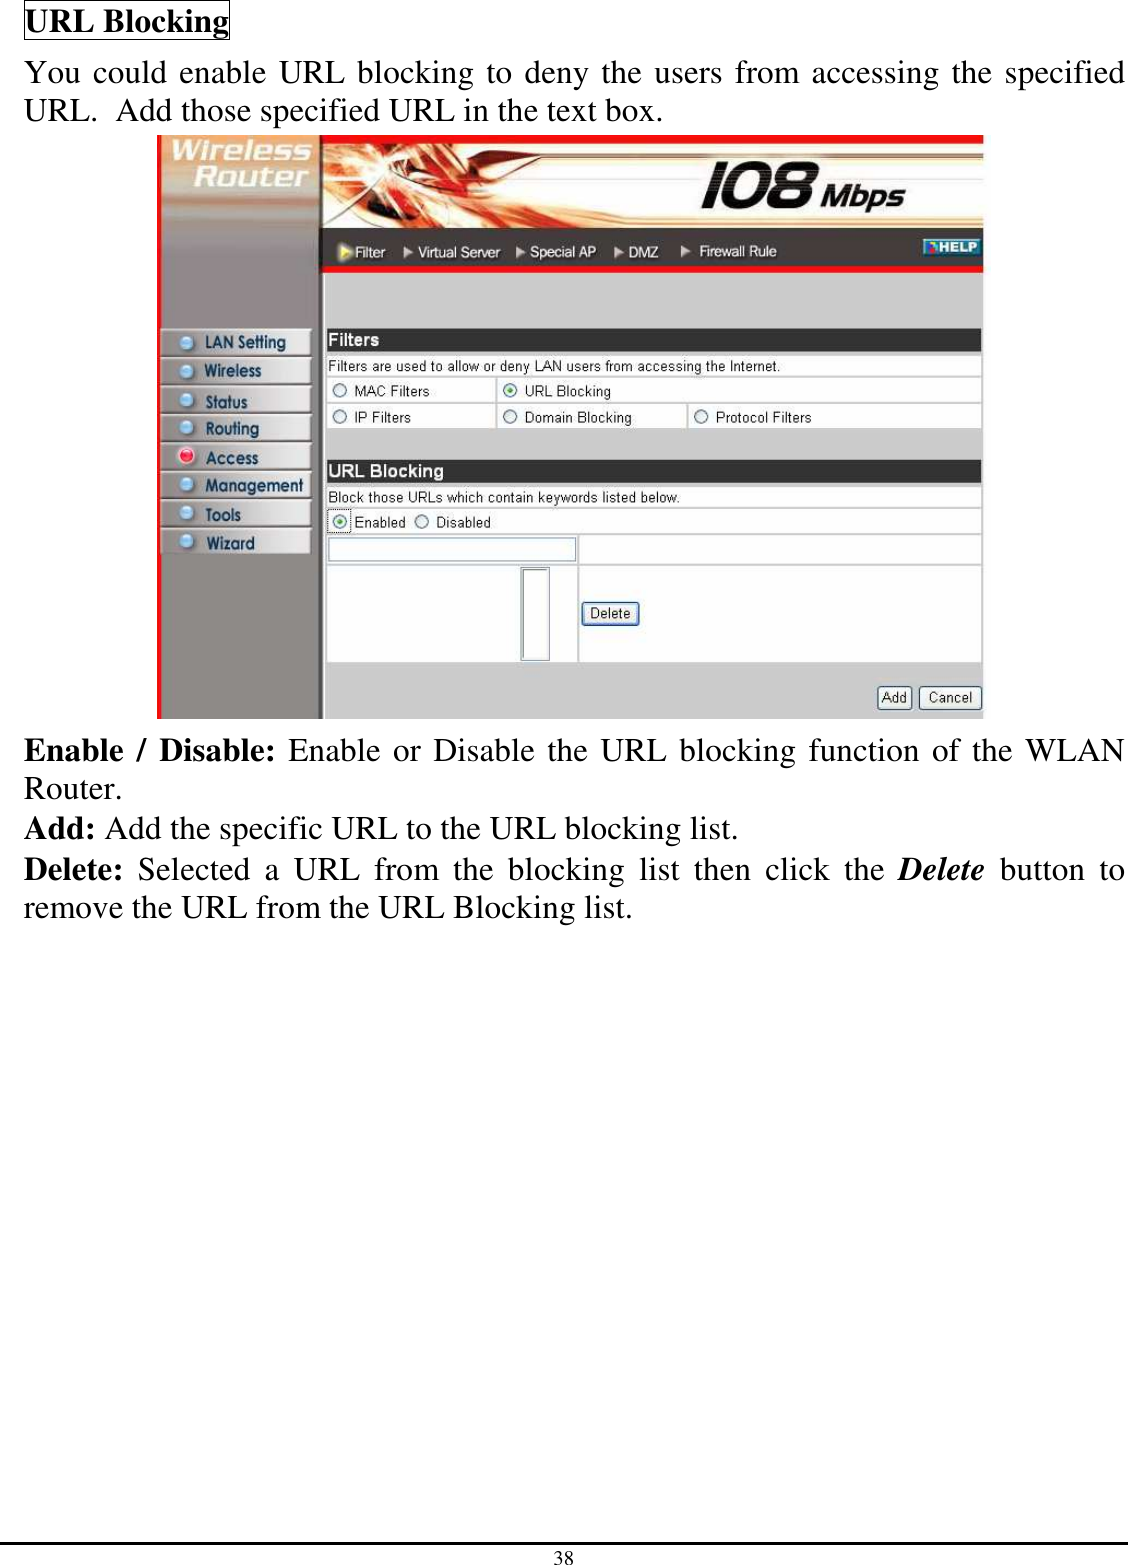 38 URL Blocking You could enable URL blocking to deny the users from accessing the specified URL.  Add those specified URL in the text box.  Enable / Disable: Enable or Disable the URL blocking function of the WLAN Router. Add: Add the specific URL to the URL blocking list. Delete:  Selected  a  URL  from  the  blocking  list  then  click  the  Delete  button  to remove the URL from the URL Blocking list. 